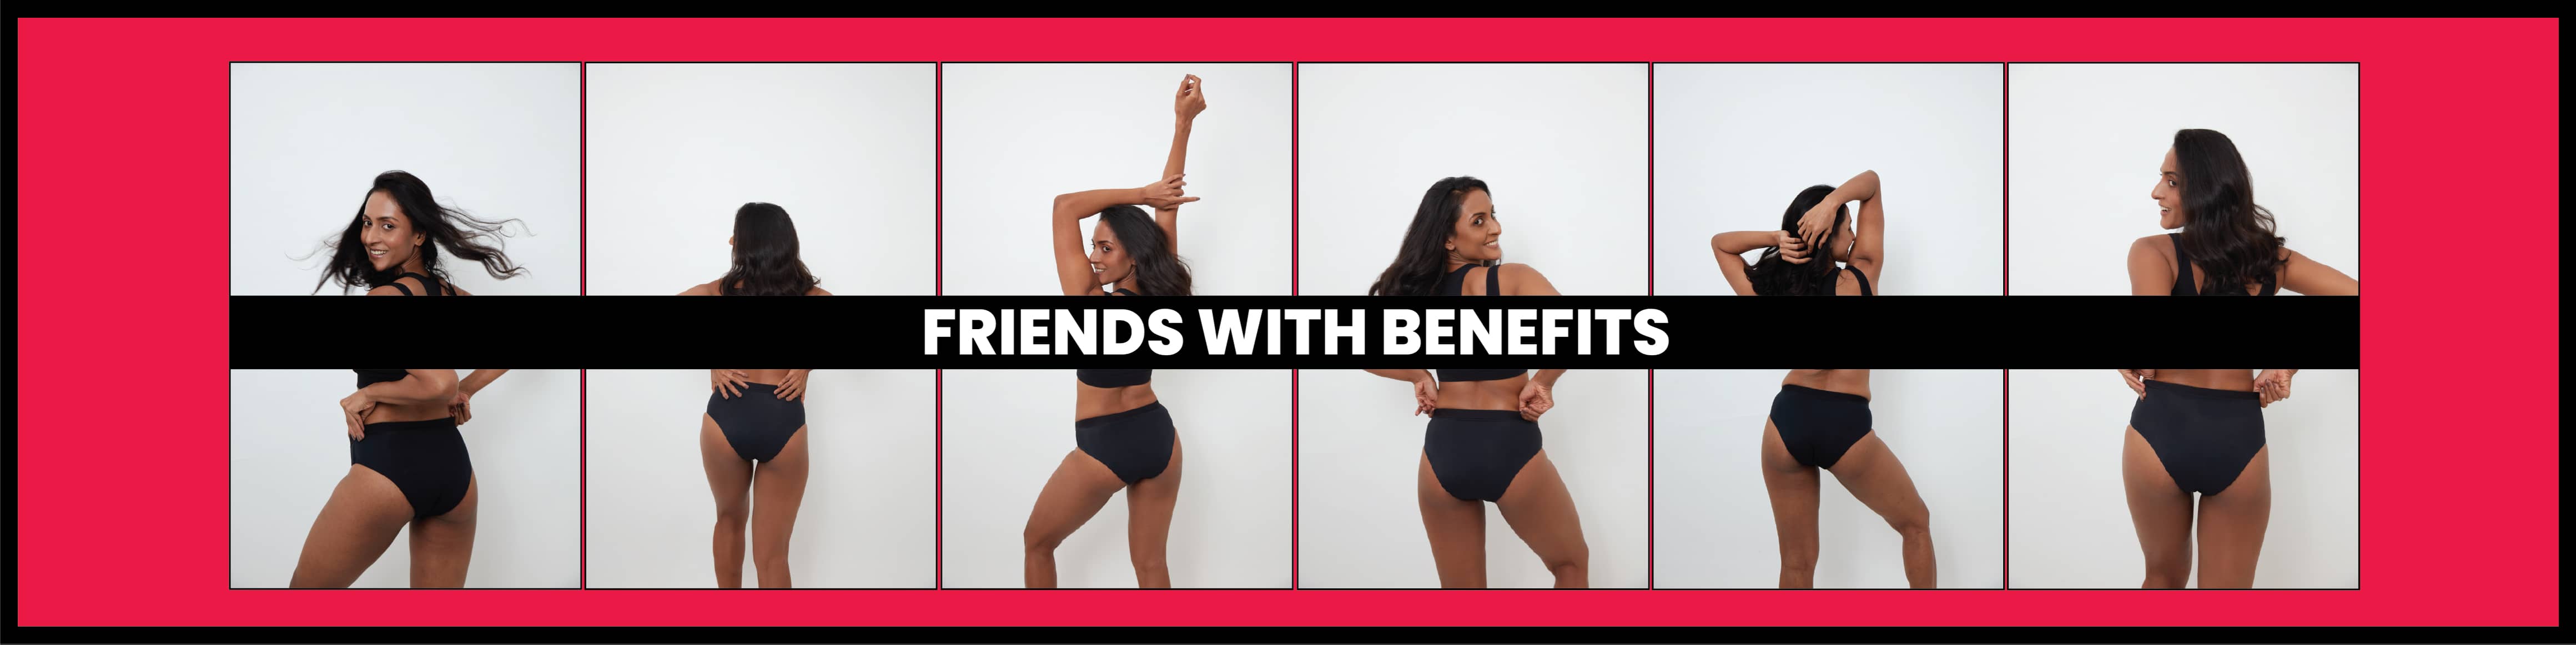 Friends with benefit